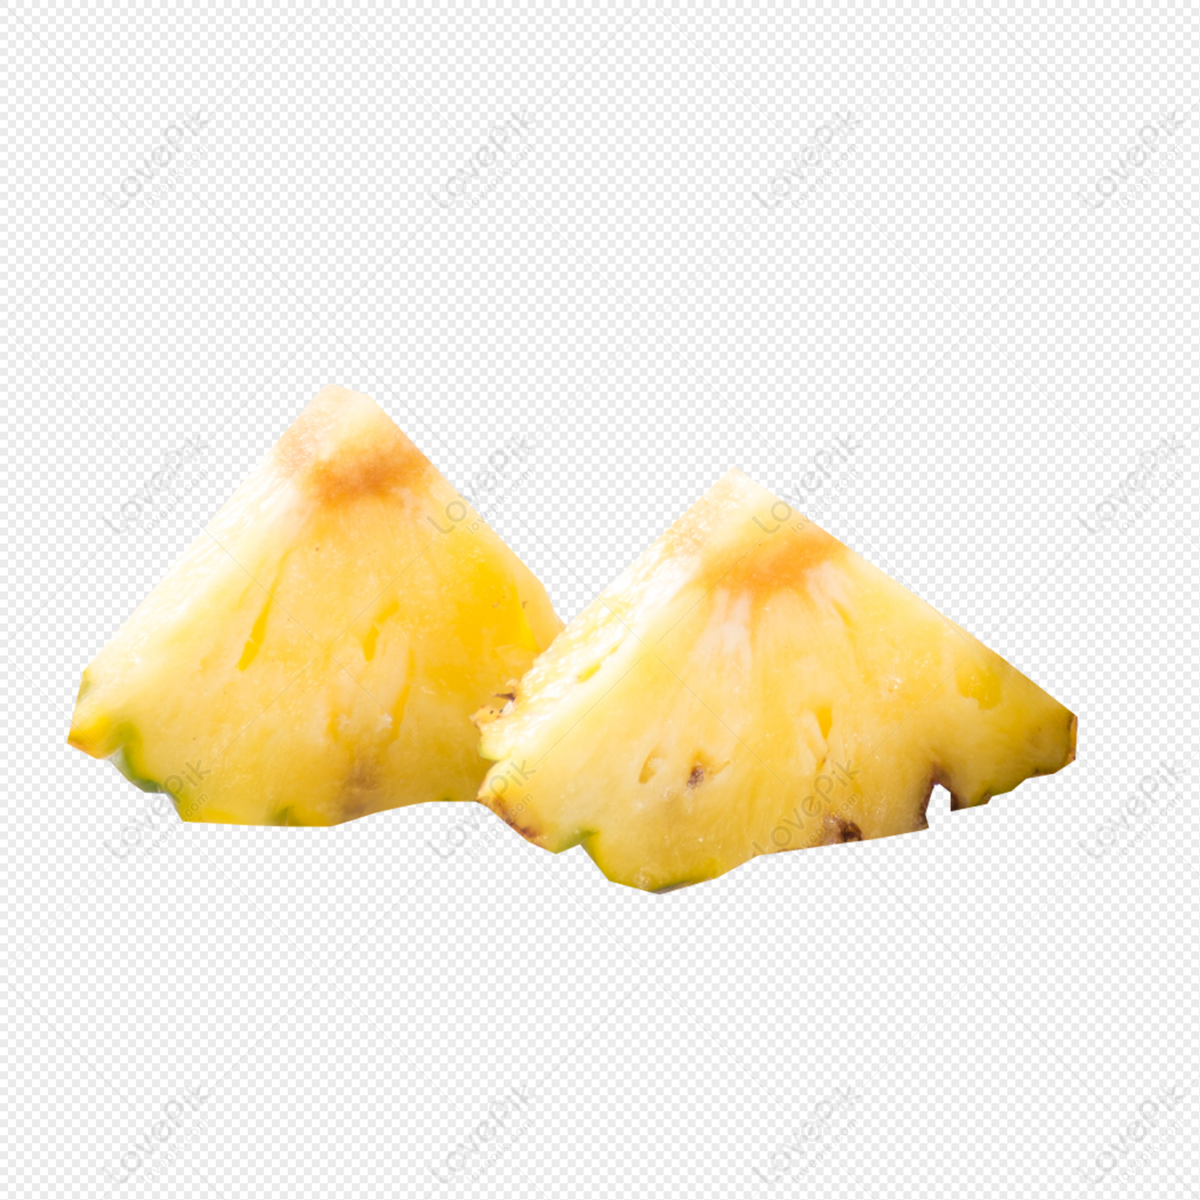 Fruit Pineapple PNG Images With Transparent Background | Free ...